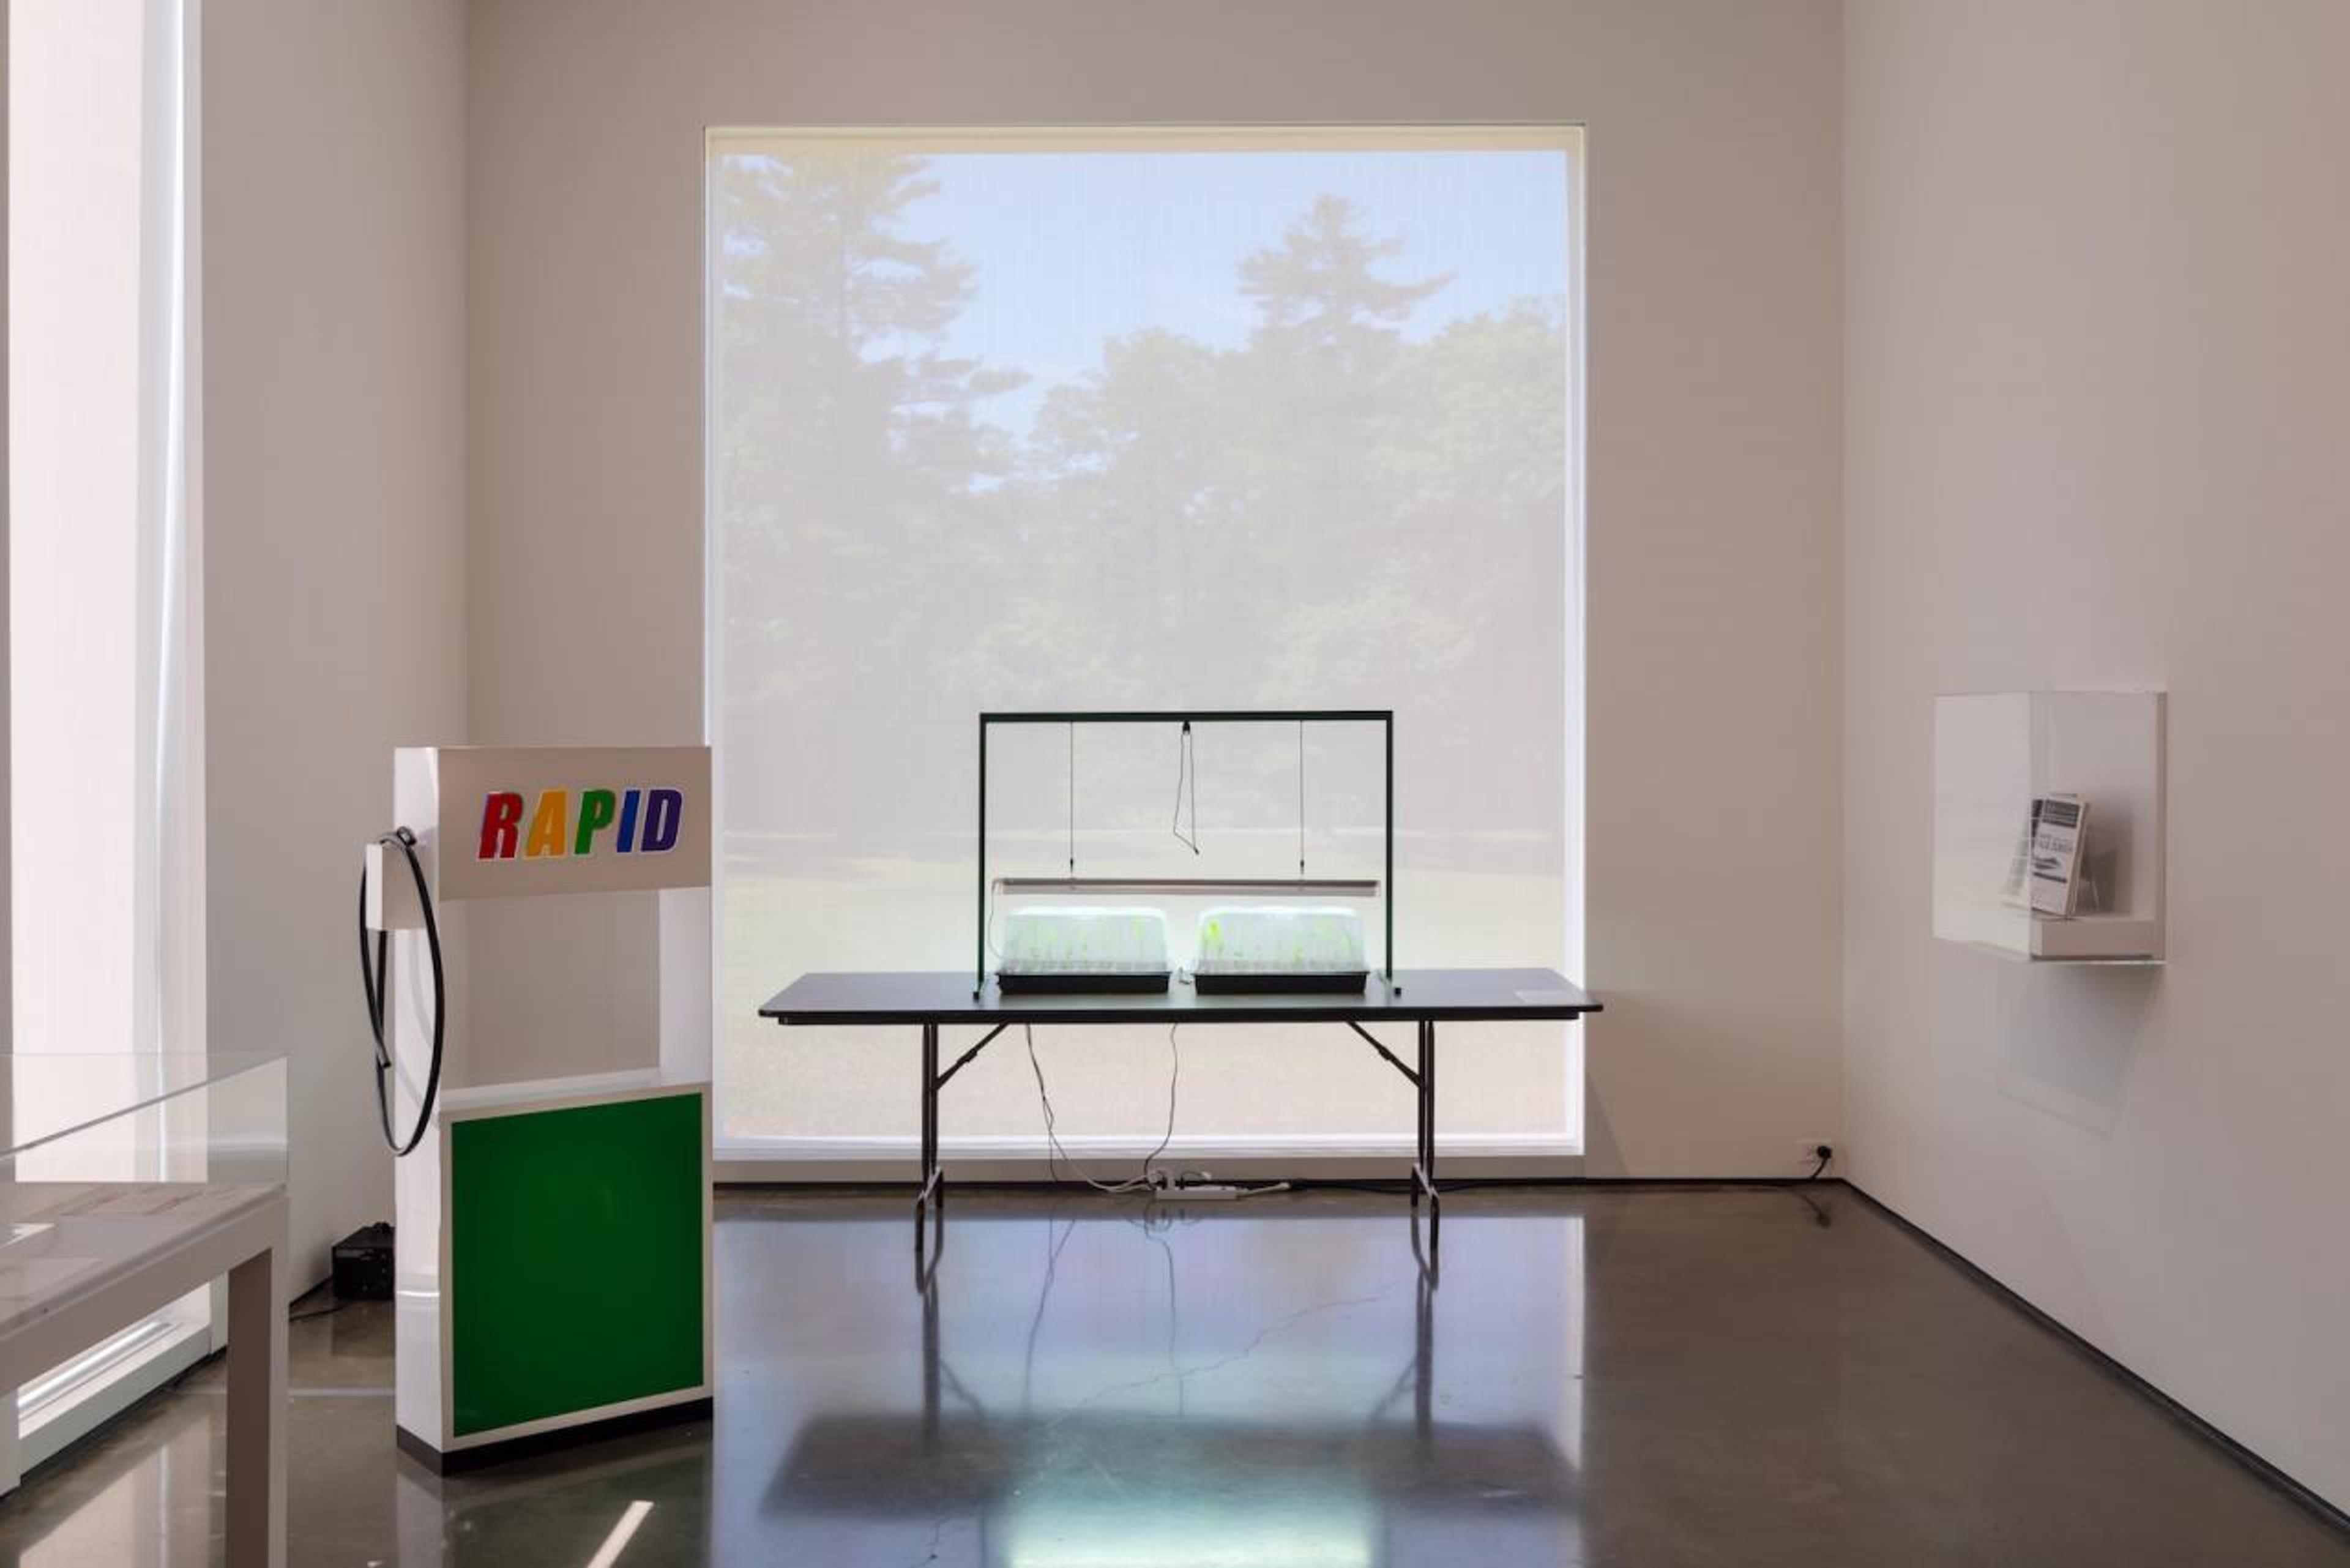 &ldquo;The Conditions of Being Art: Pat Hearn Gallery and American Fine Arts, Co. (1983&ndash;2004)&rdquo;, Hessel Museum of Art , 2018